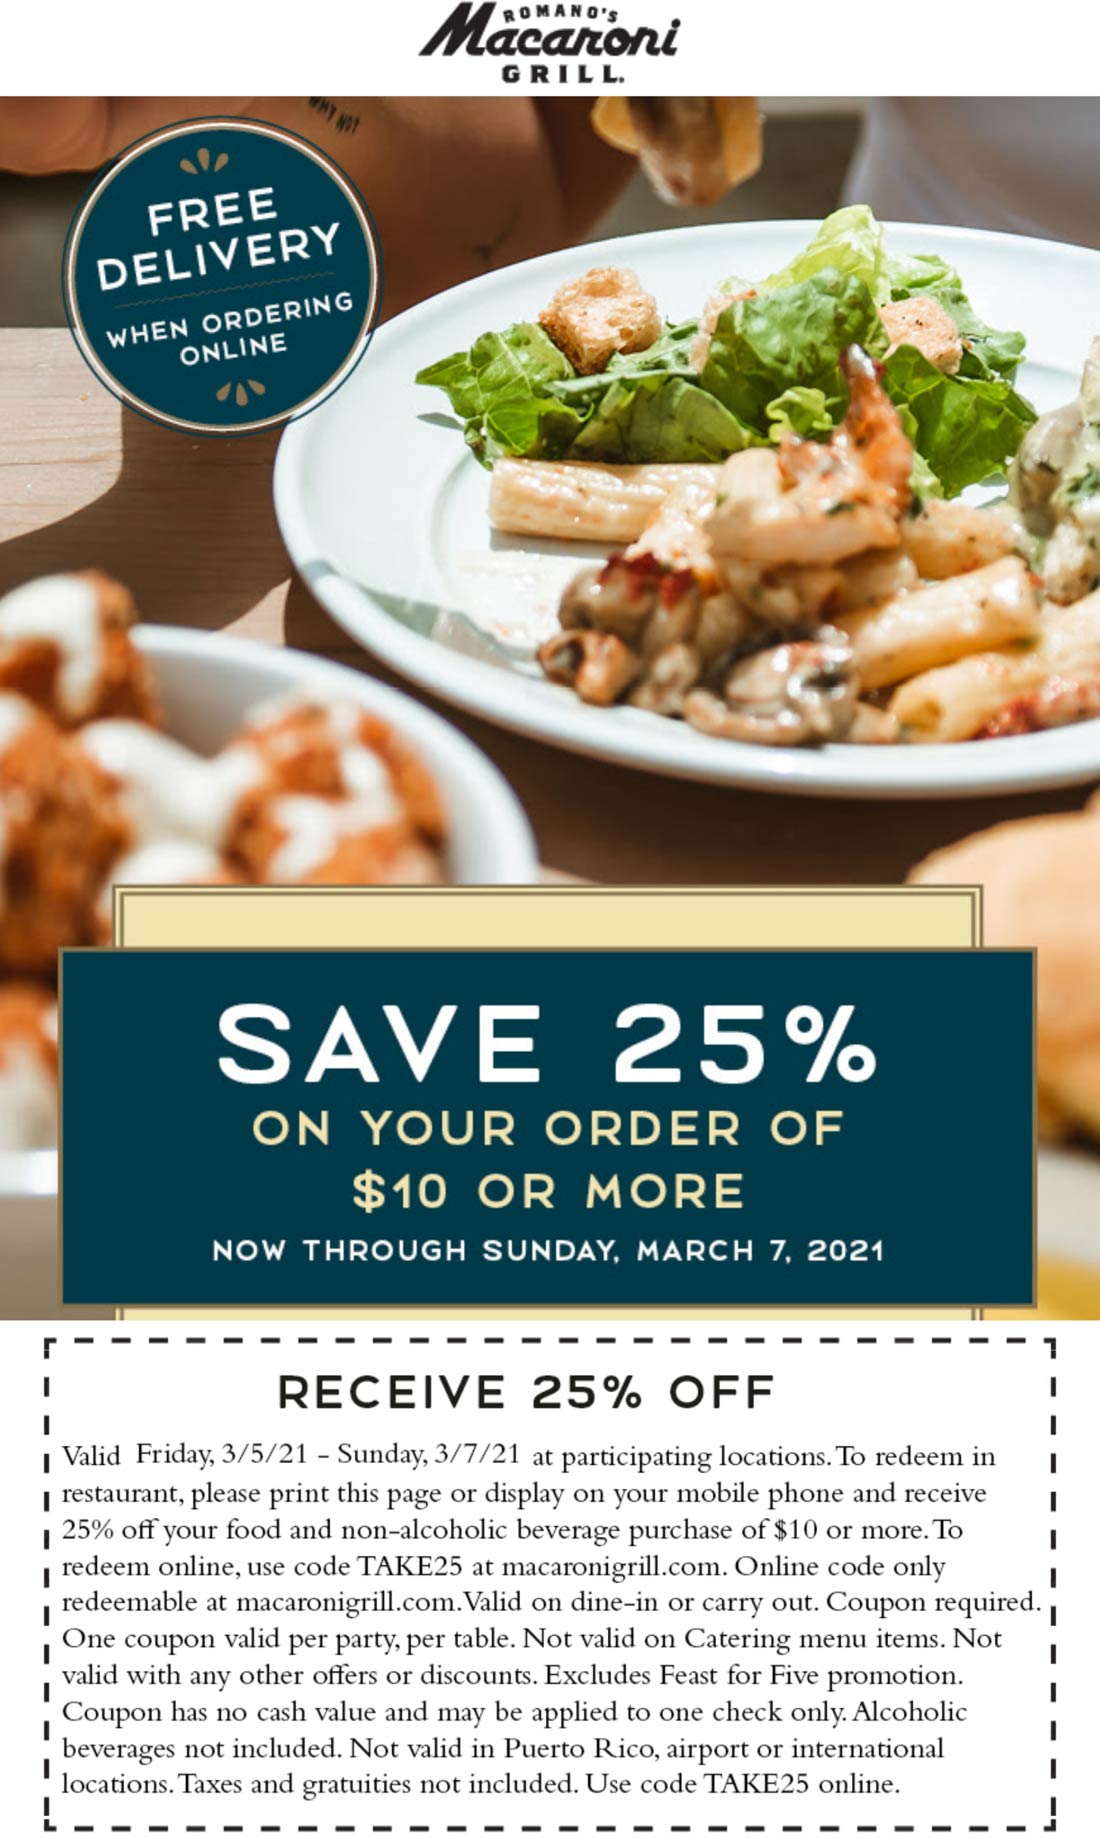 Macaroni Grill restaurants Coupon  25% off at Macaroni Grill restaurants #macaronigrill 